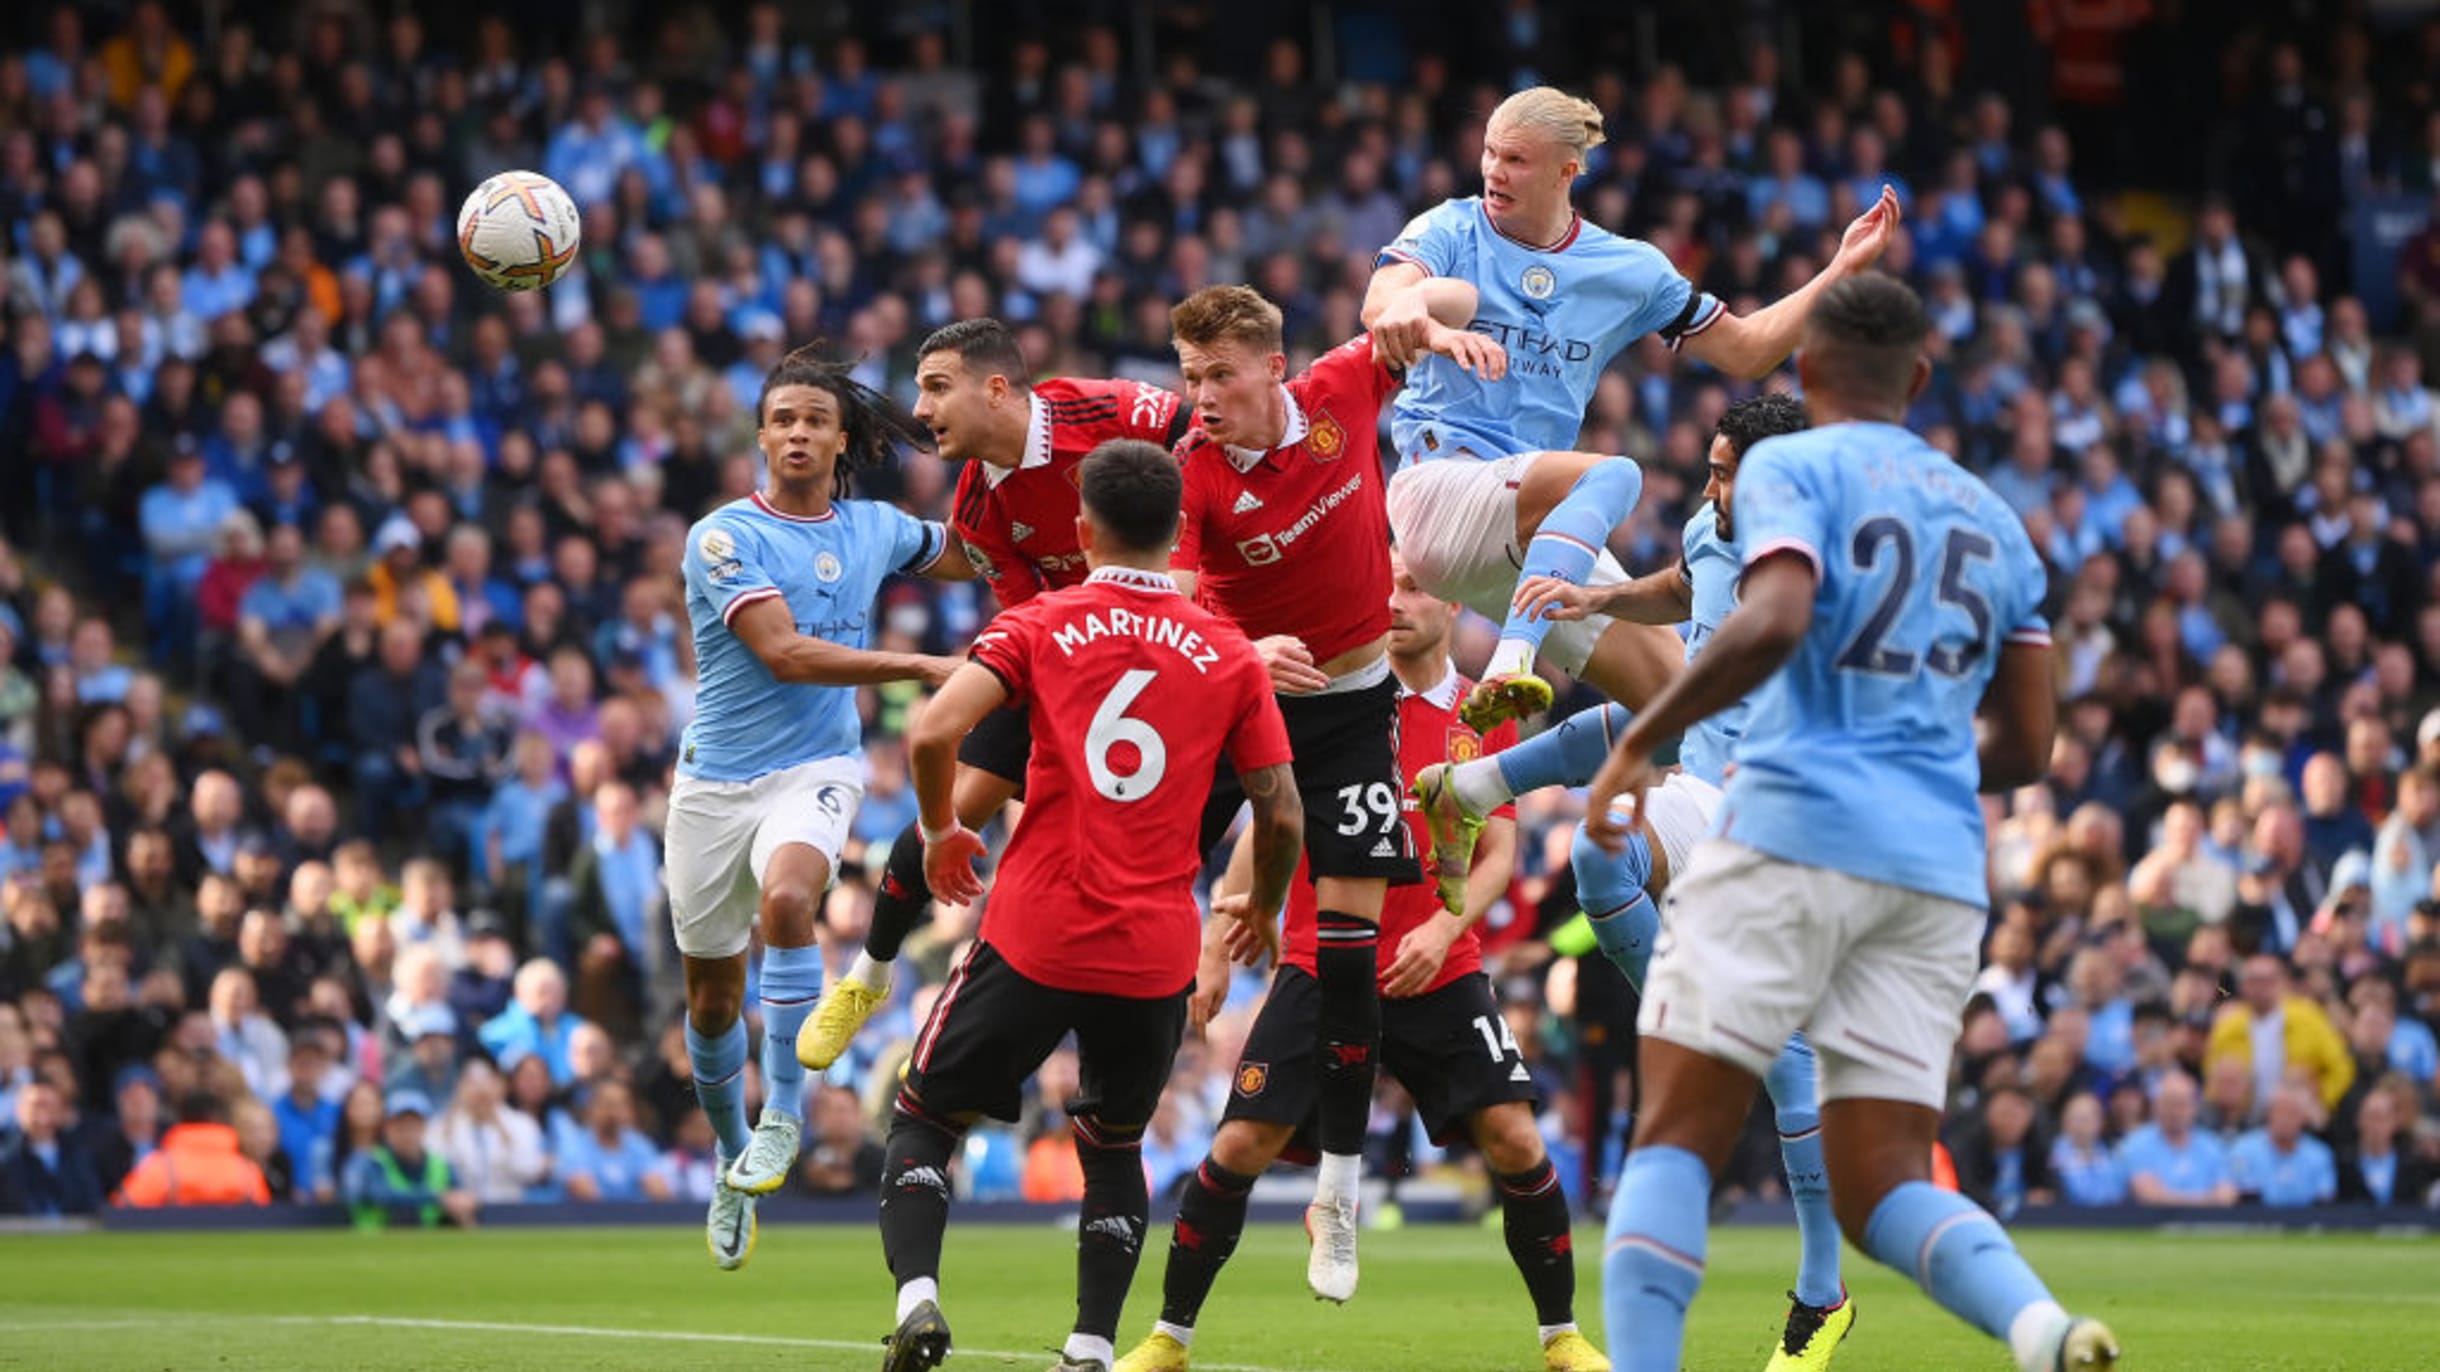 FA Cup 2022-23 final Manchester City vs Manchester United, watch live streaming and telecast in India